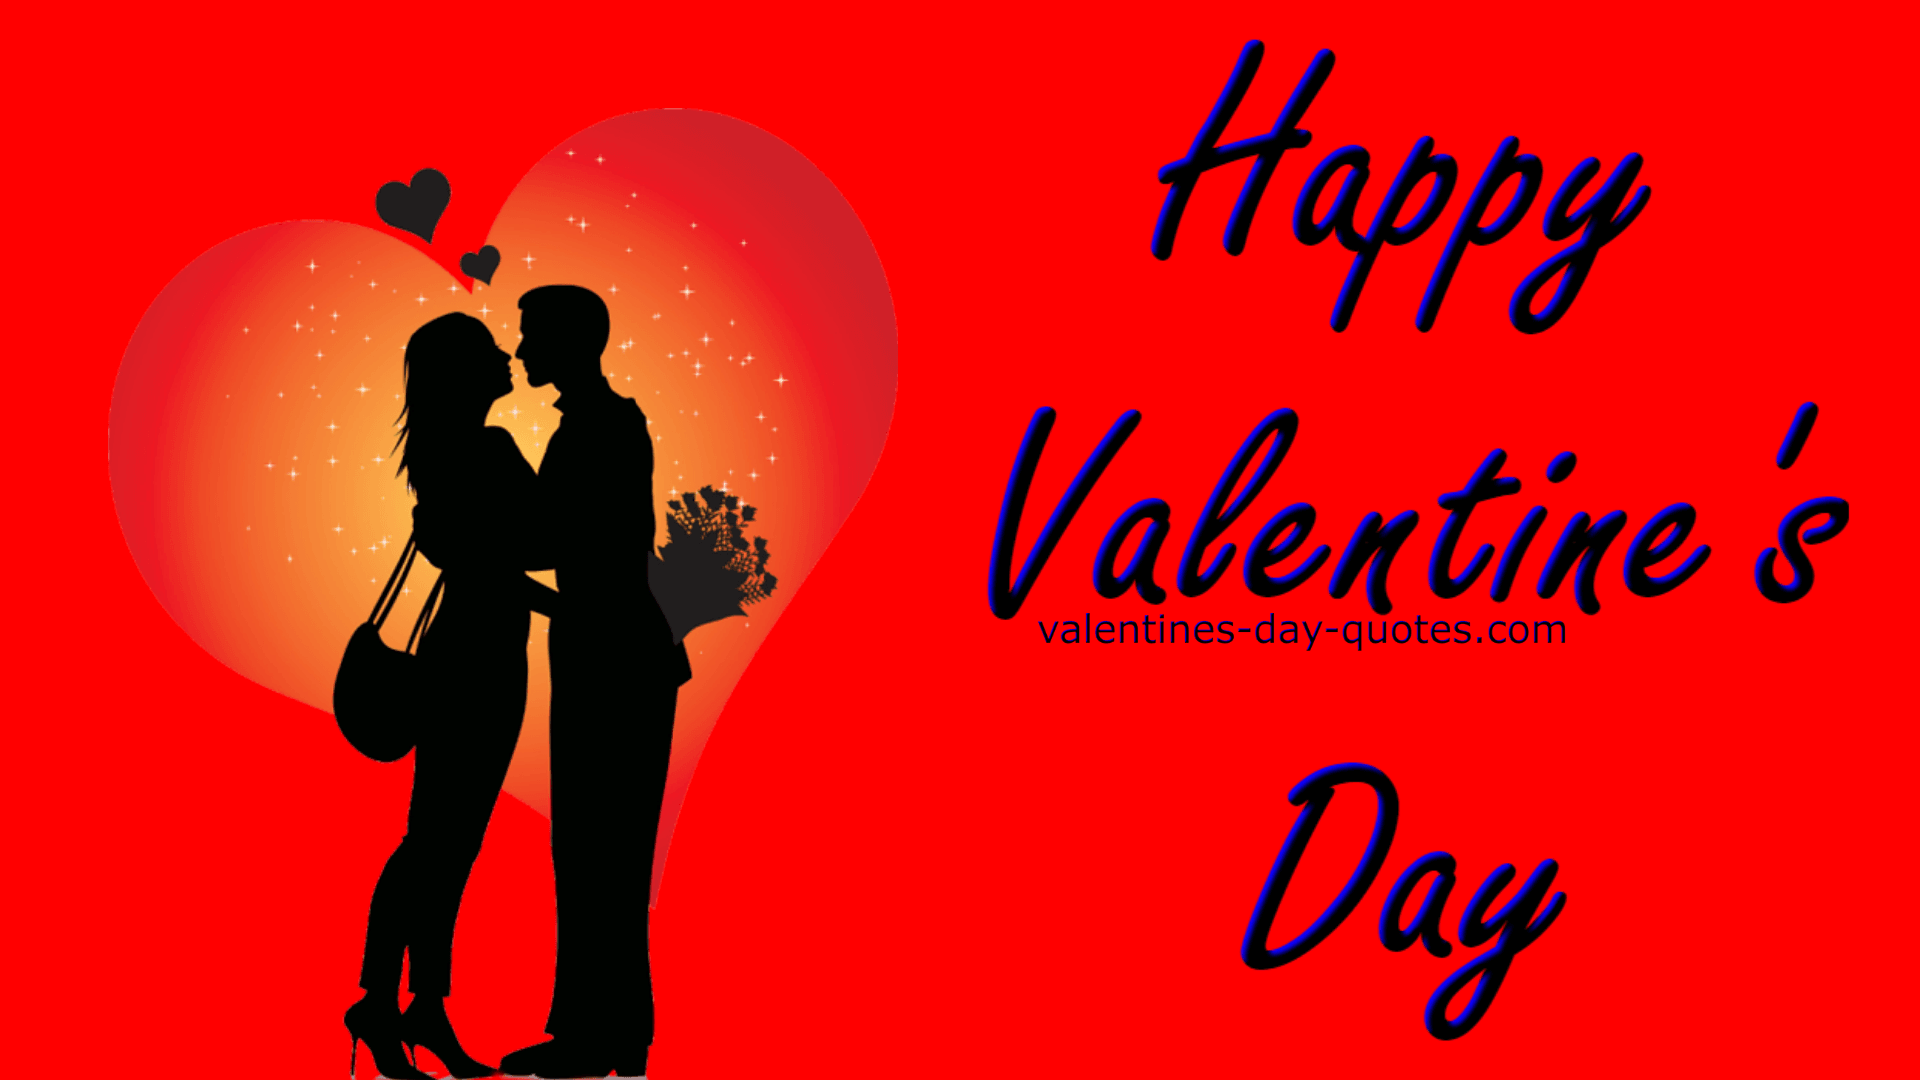 Happy Valentines Day Image 2019 Day Quotes